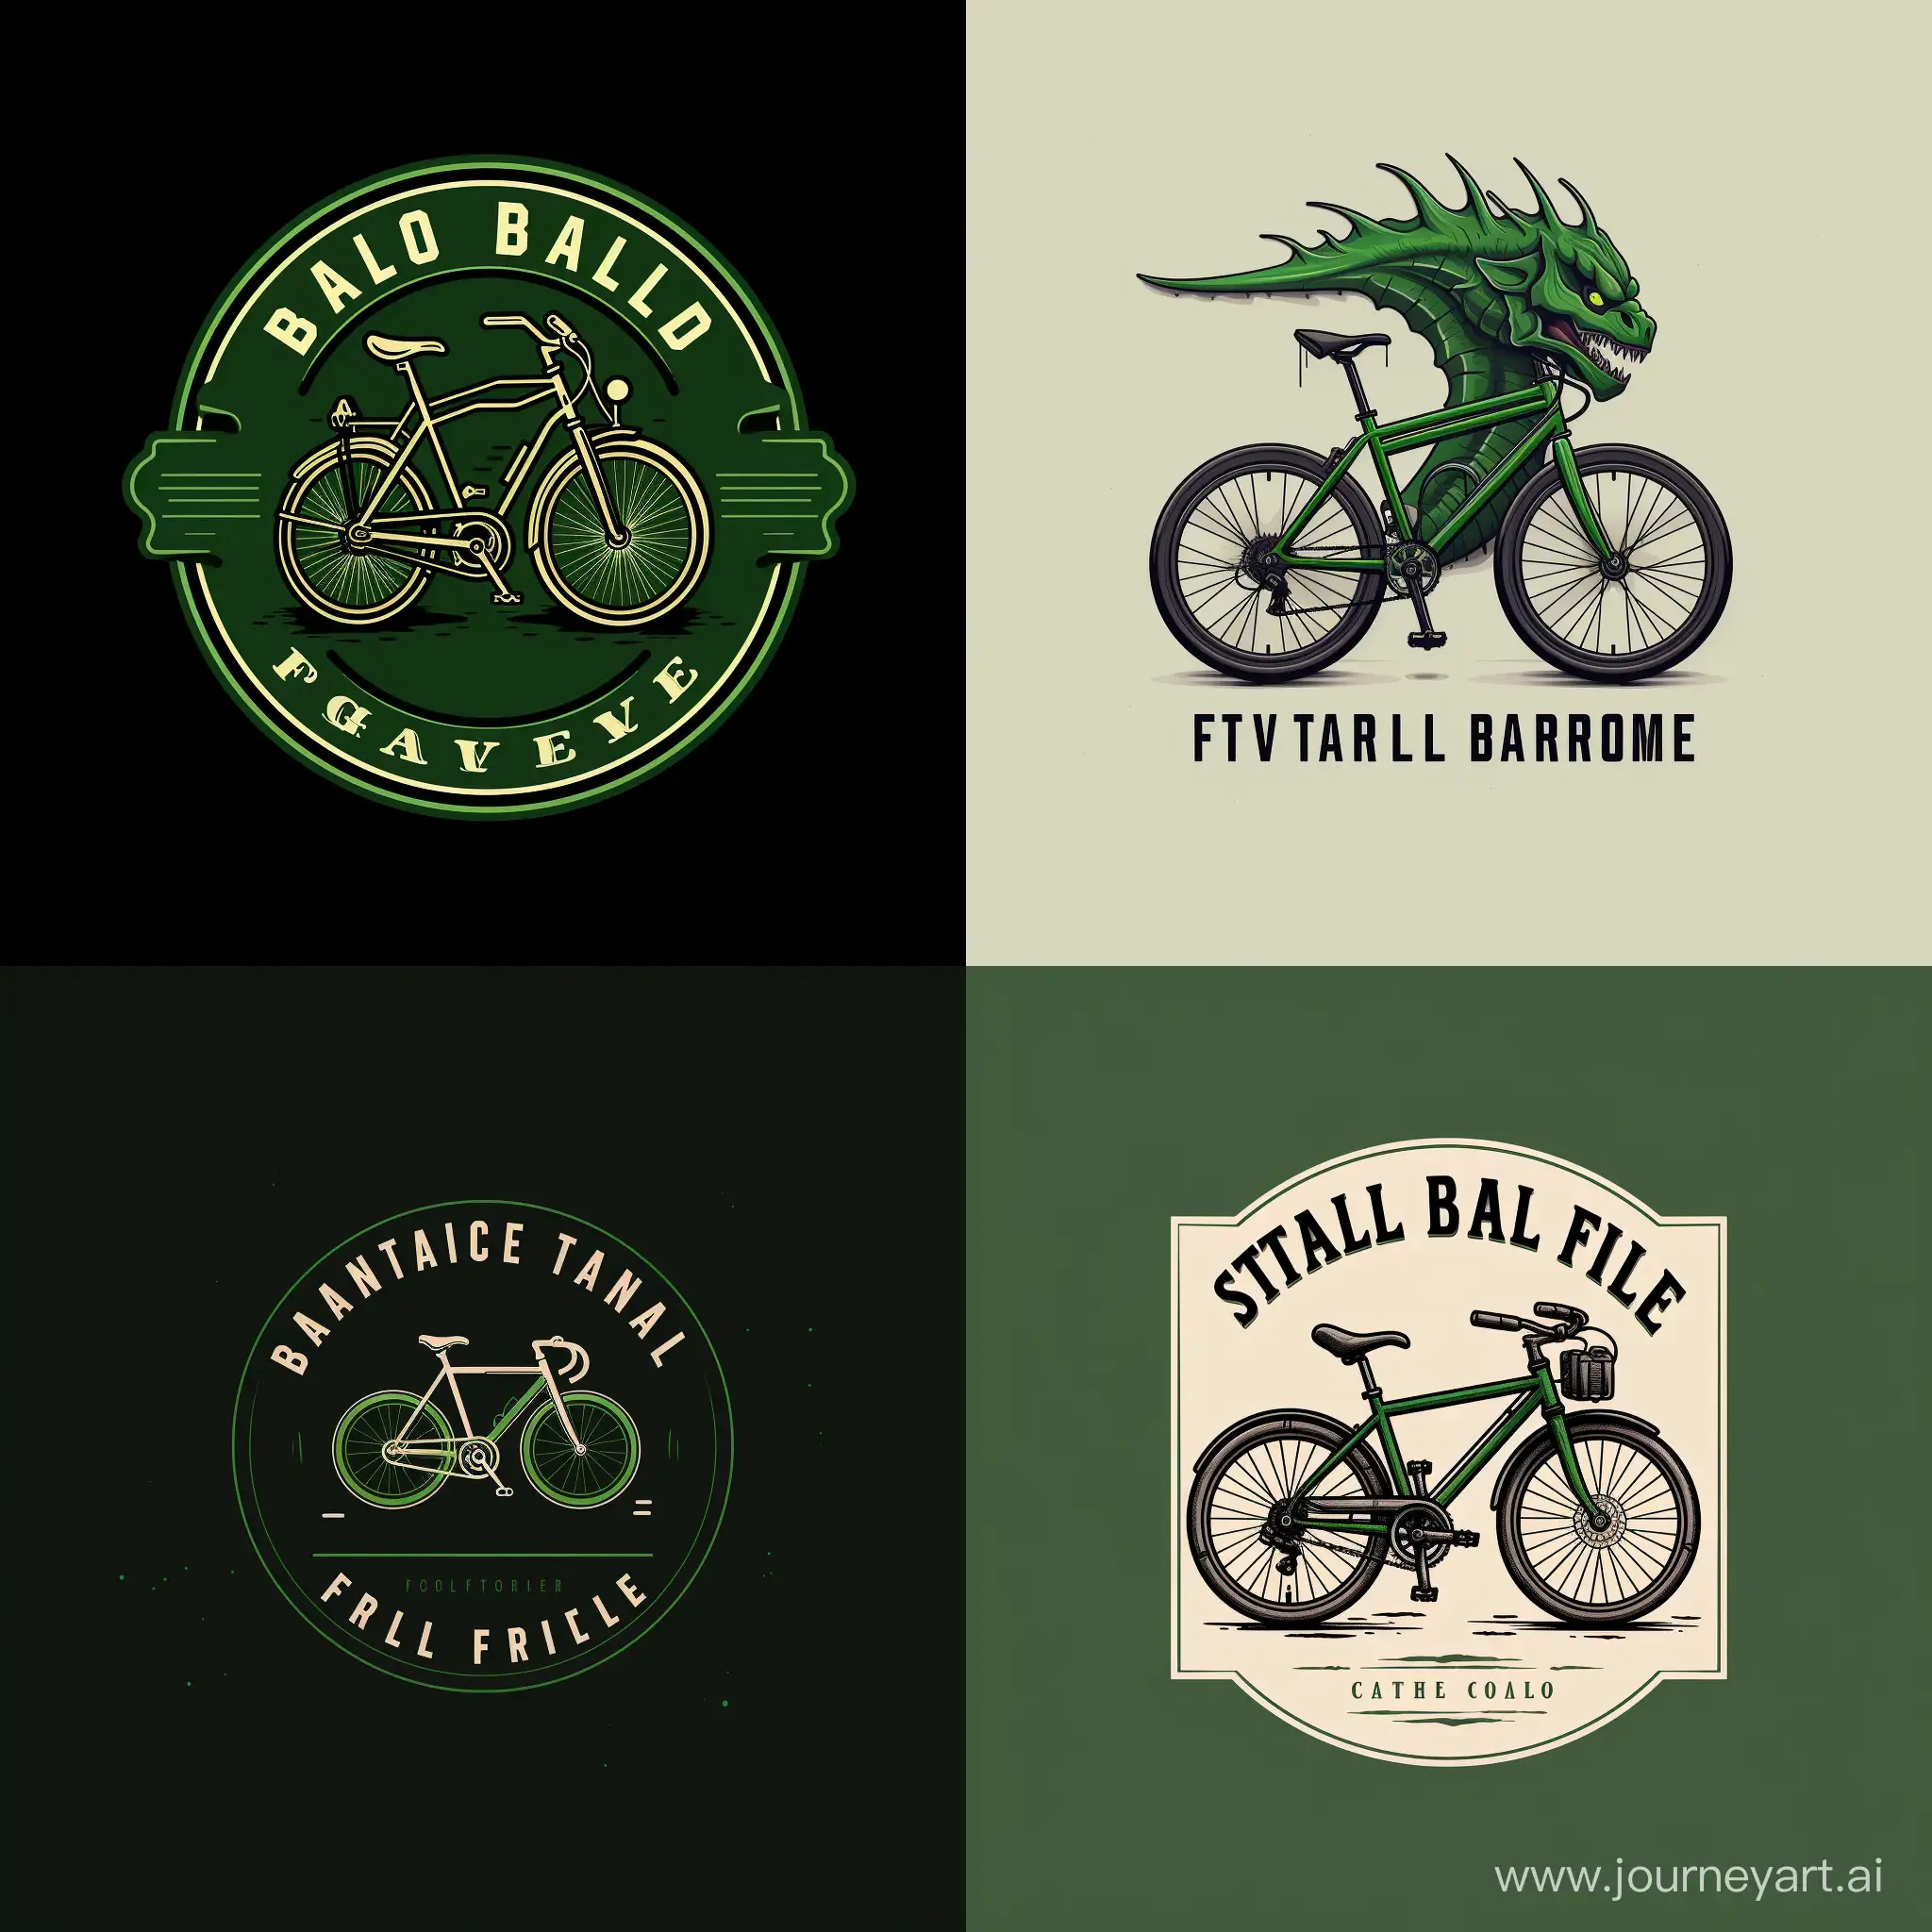 can you create for me a logo for a bicycles shop application, I want the logo to match with the application theme color which is green and I also want the logo to have a transparent background